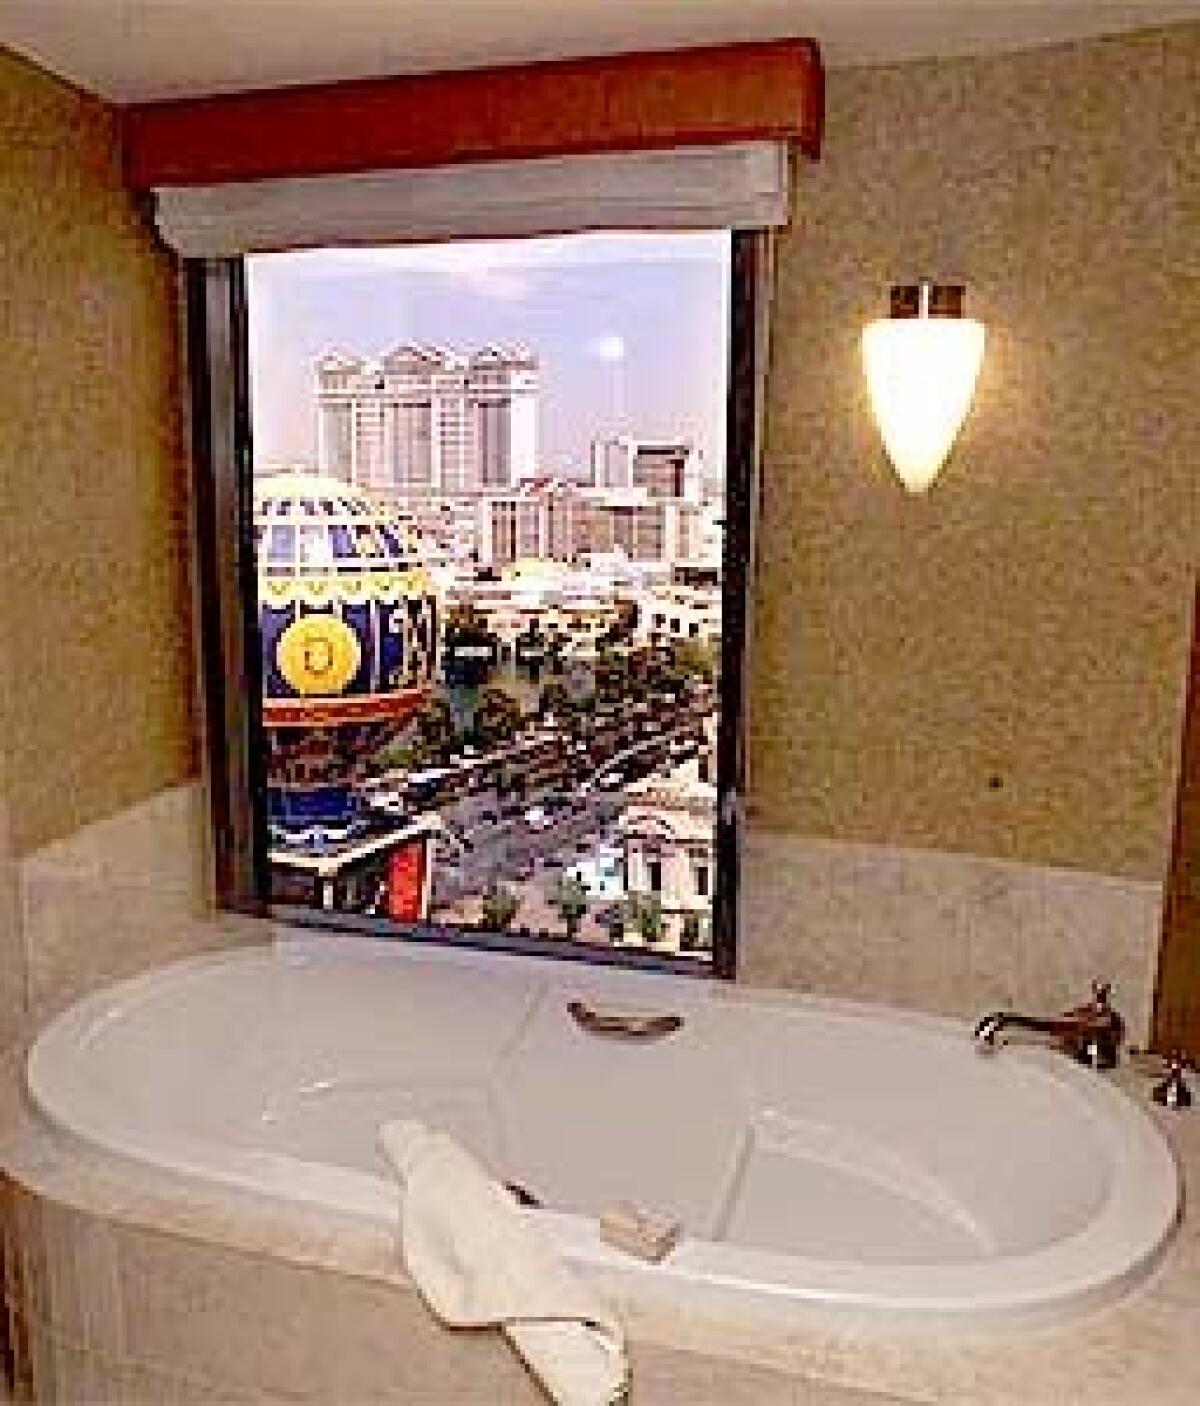 The best feature of the Aladdin: a tub with a view of the Strip.